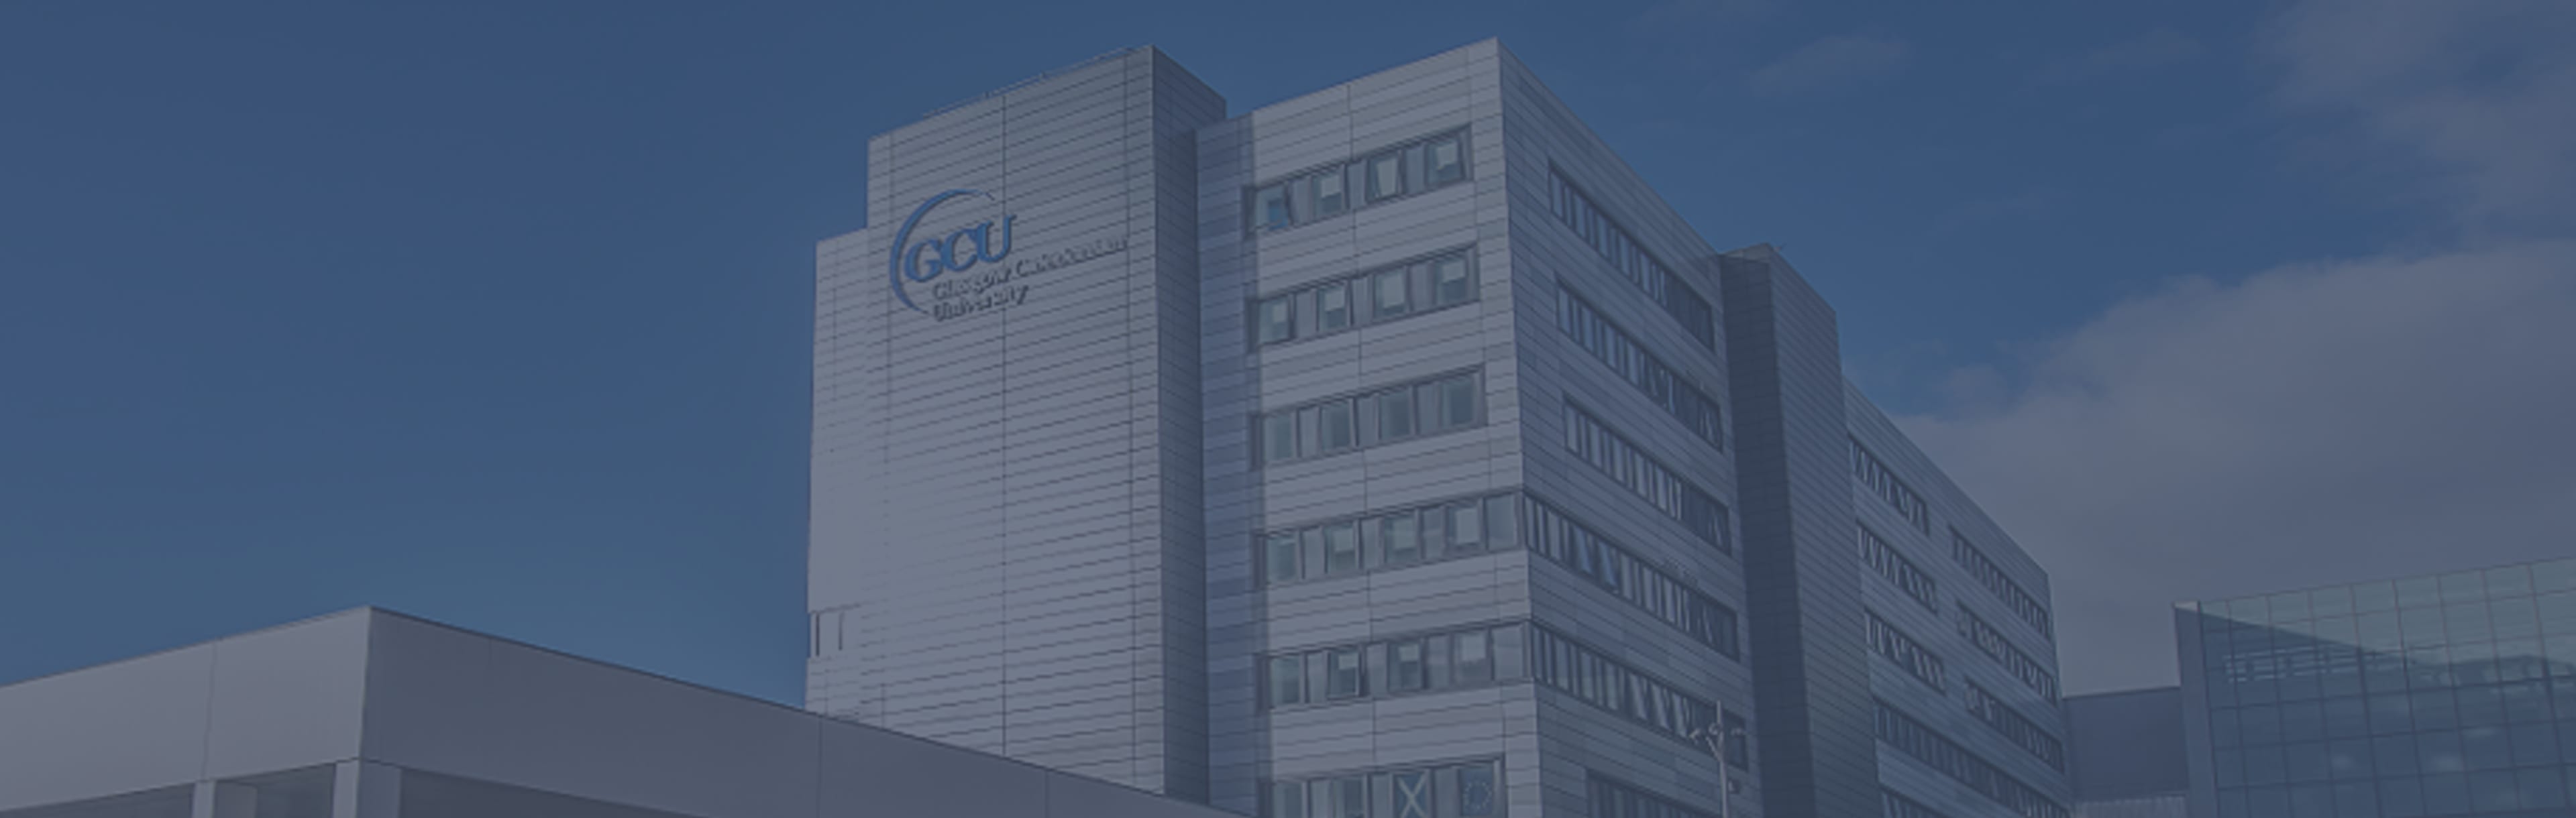 Glasgow Caledonian University - The School of Health and Life Sciences BSc in Ophthalmic Dispensing Management